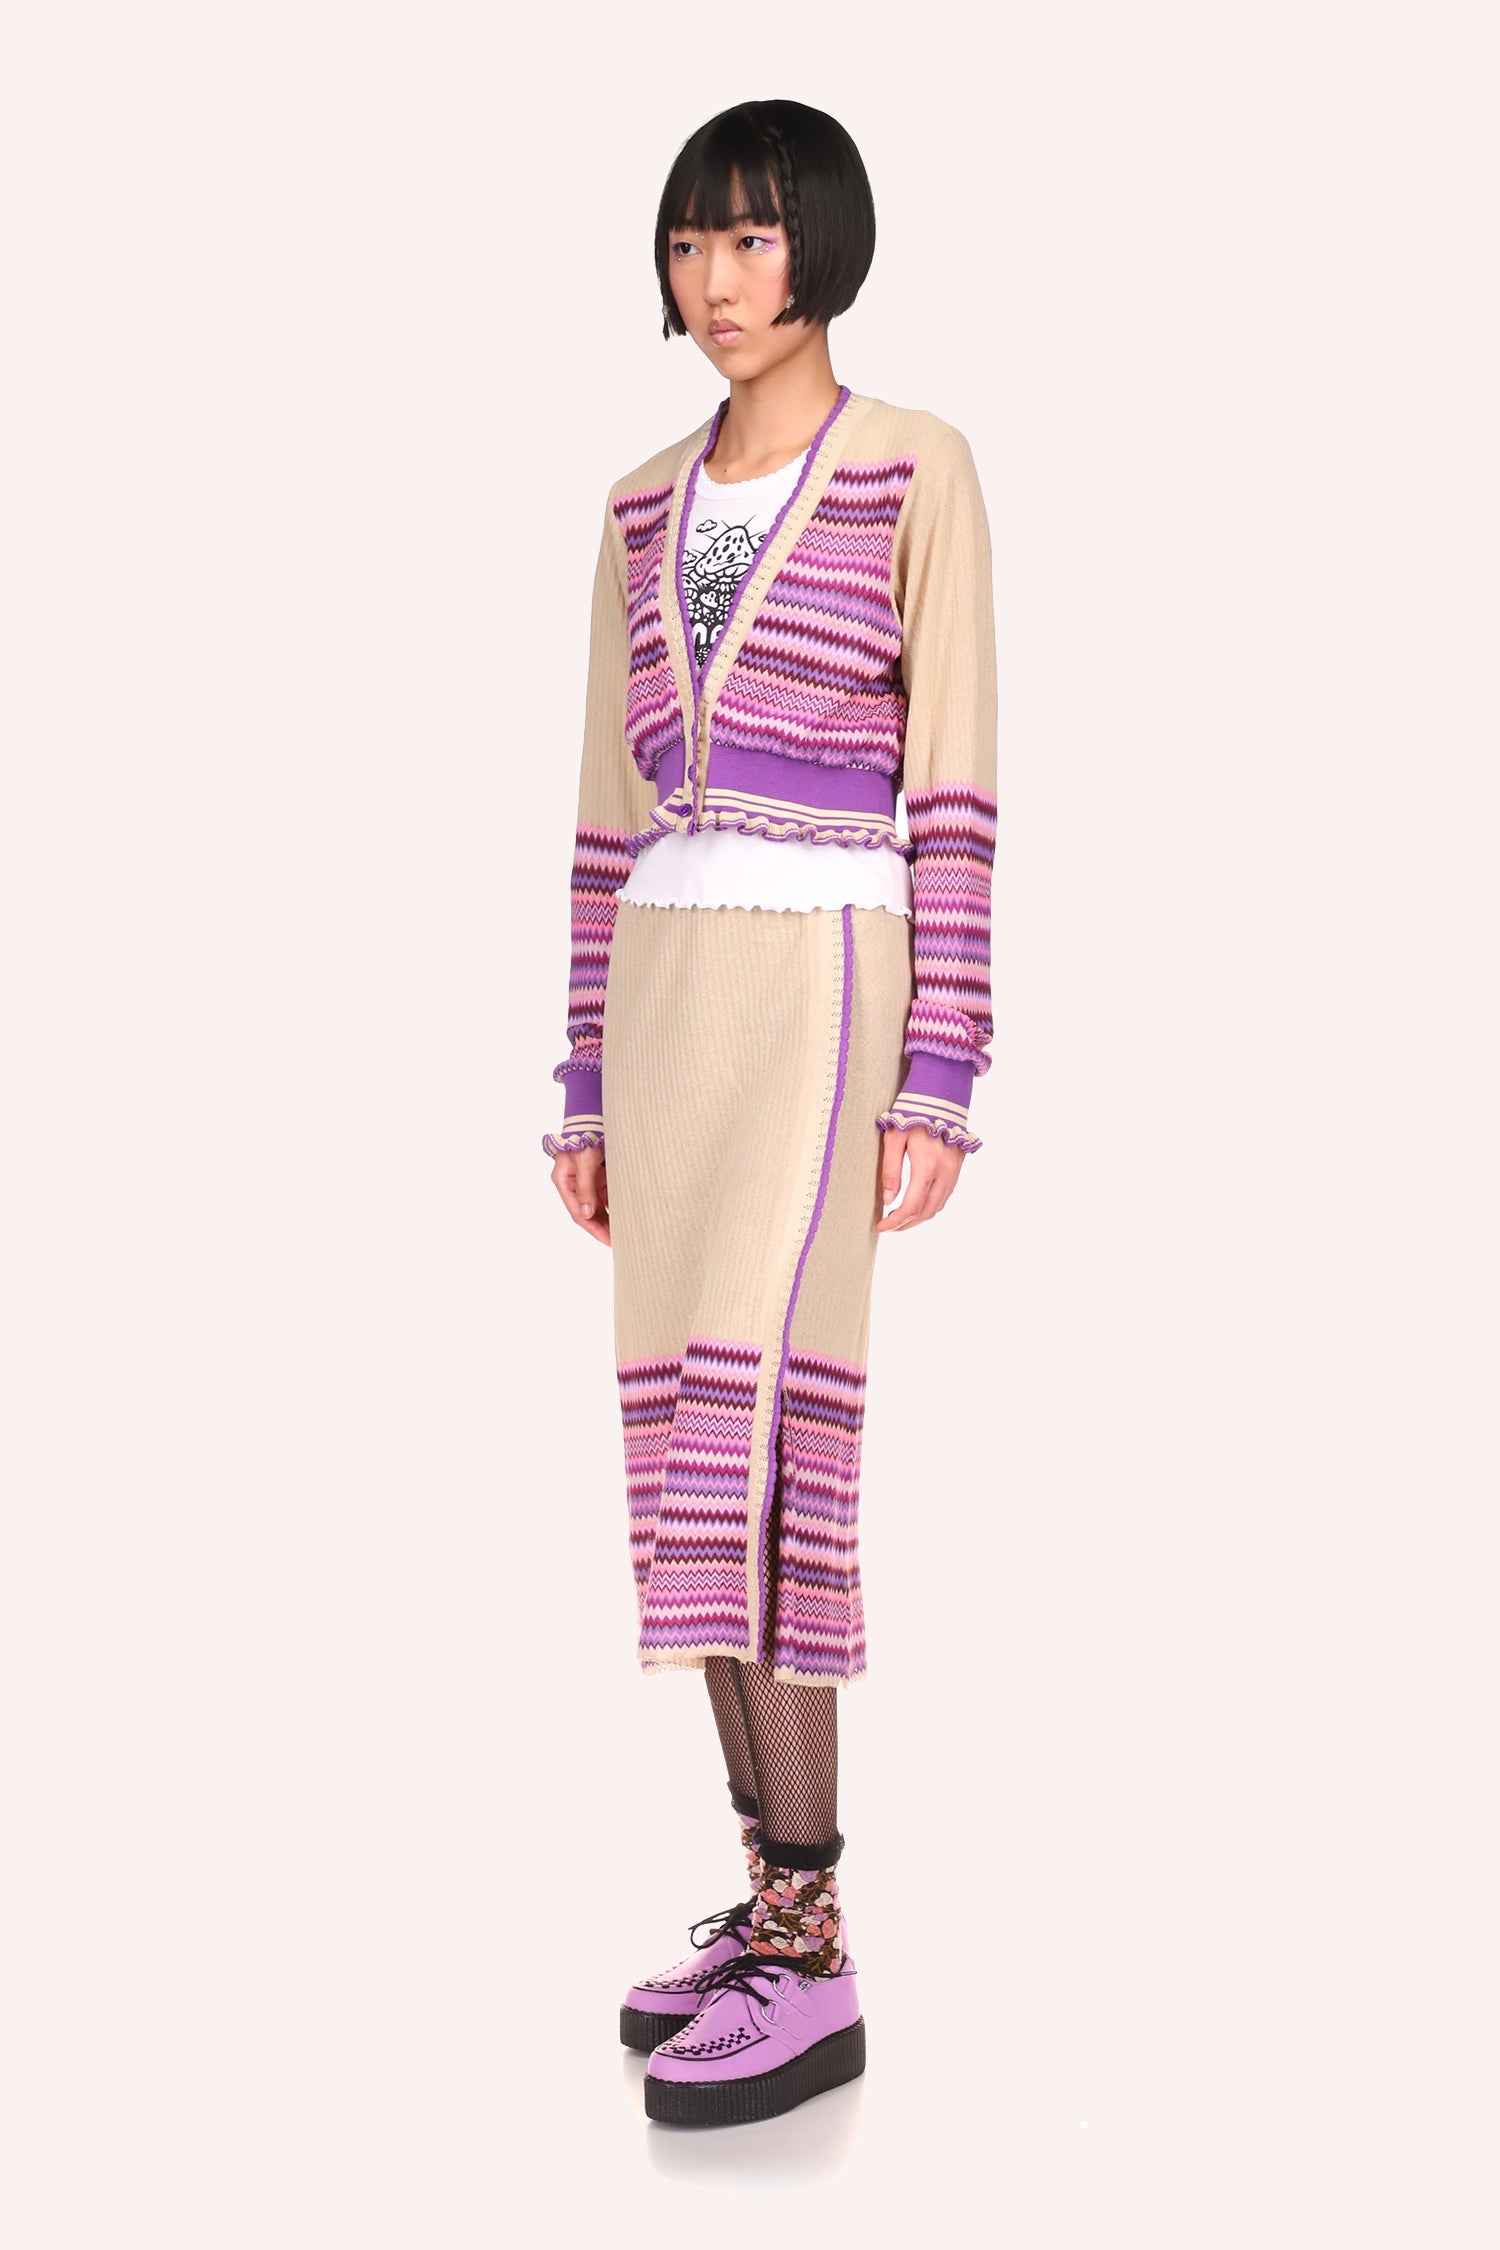 Tonal Zigzag Skirt lavender zigzag is lines of hue of lavender around the bottom of the dress